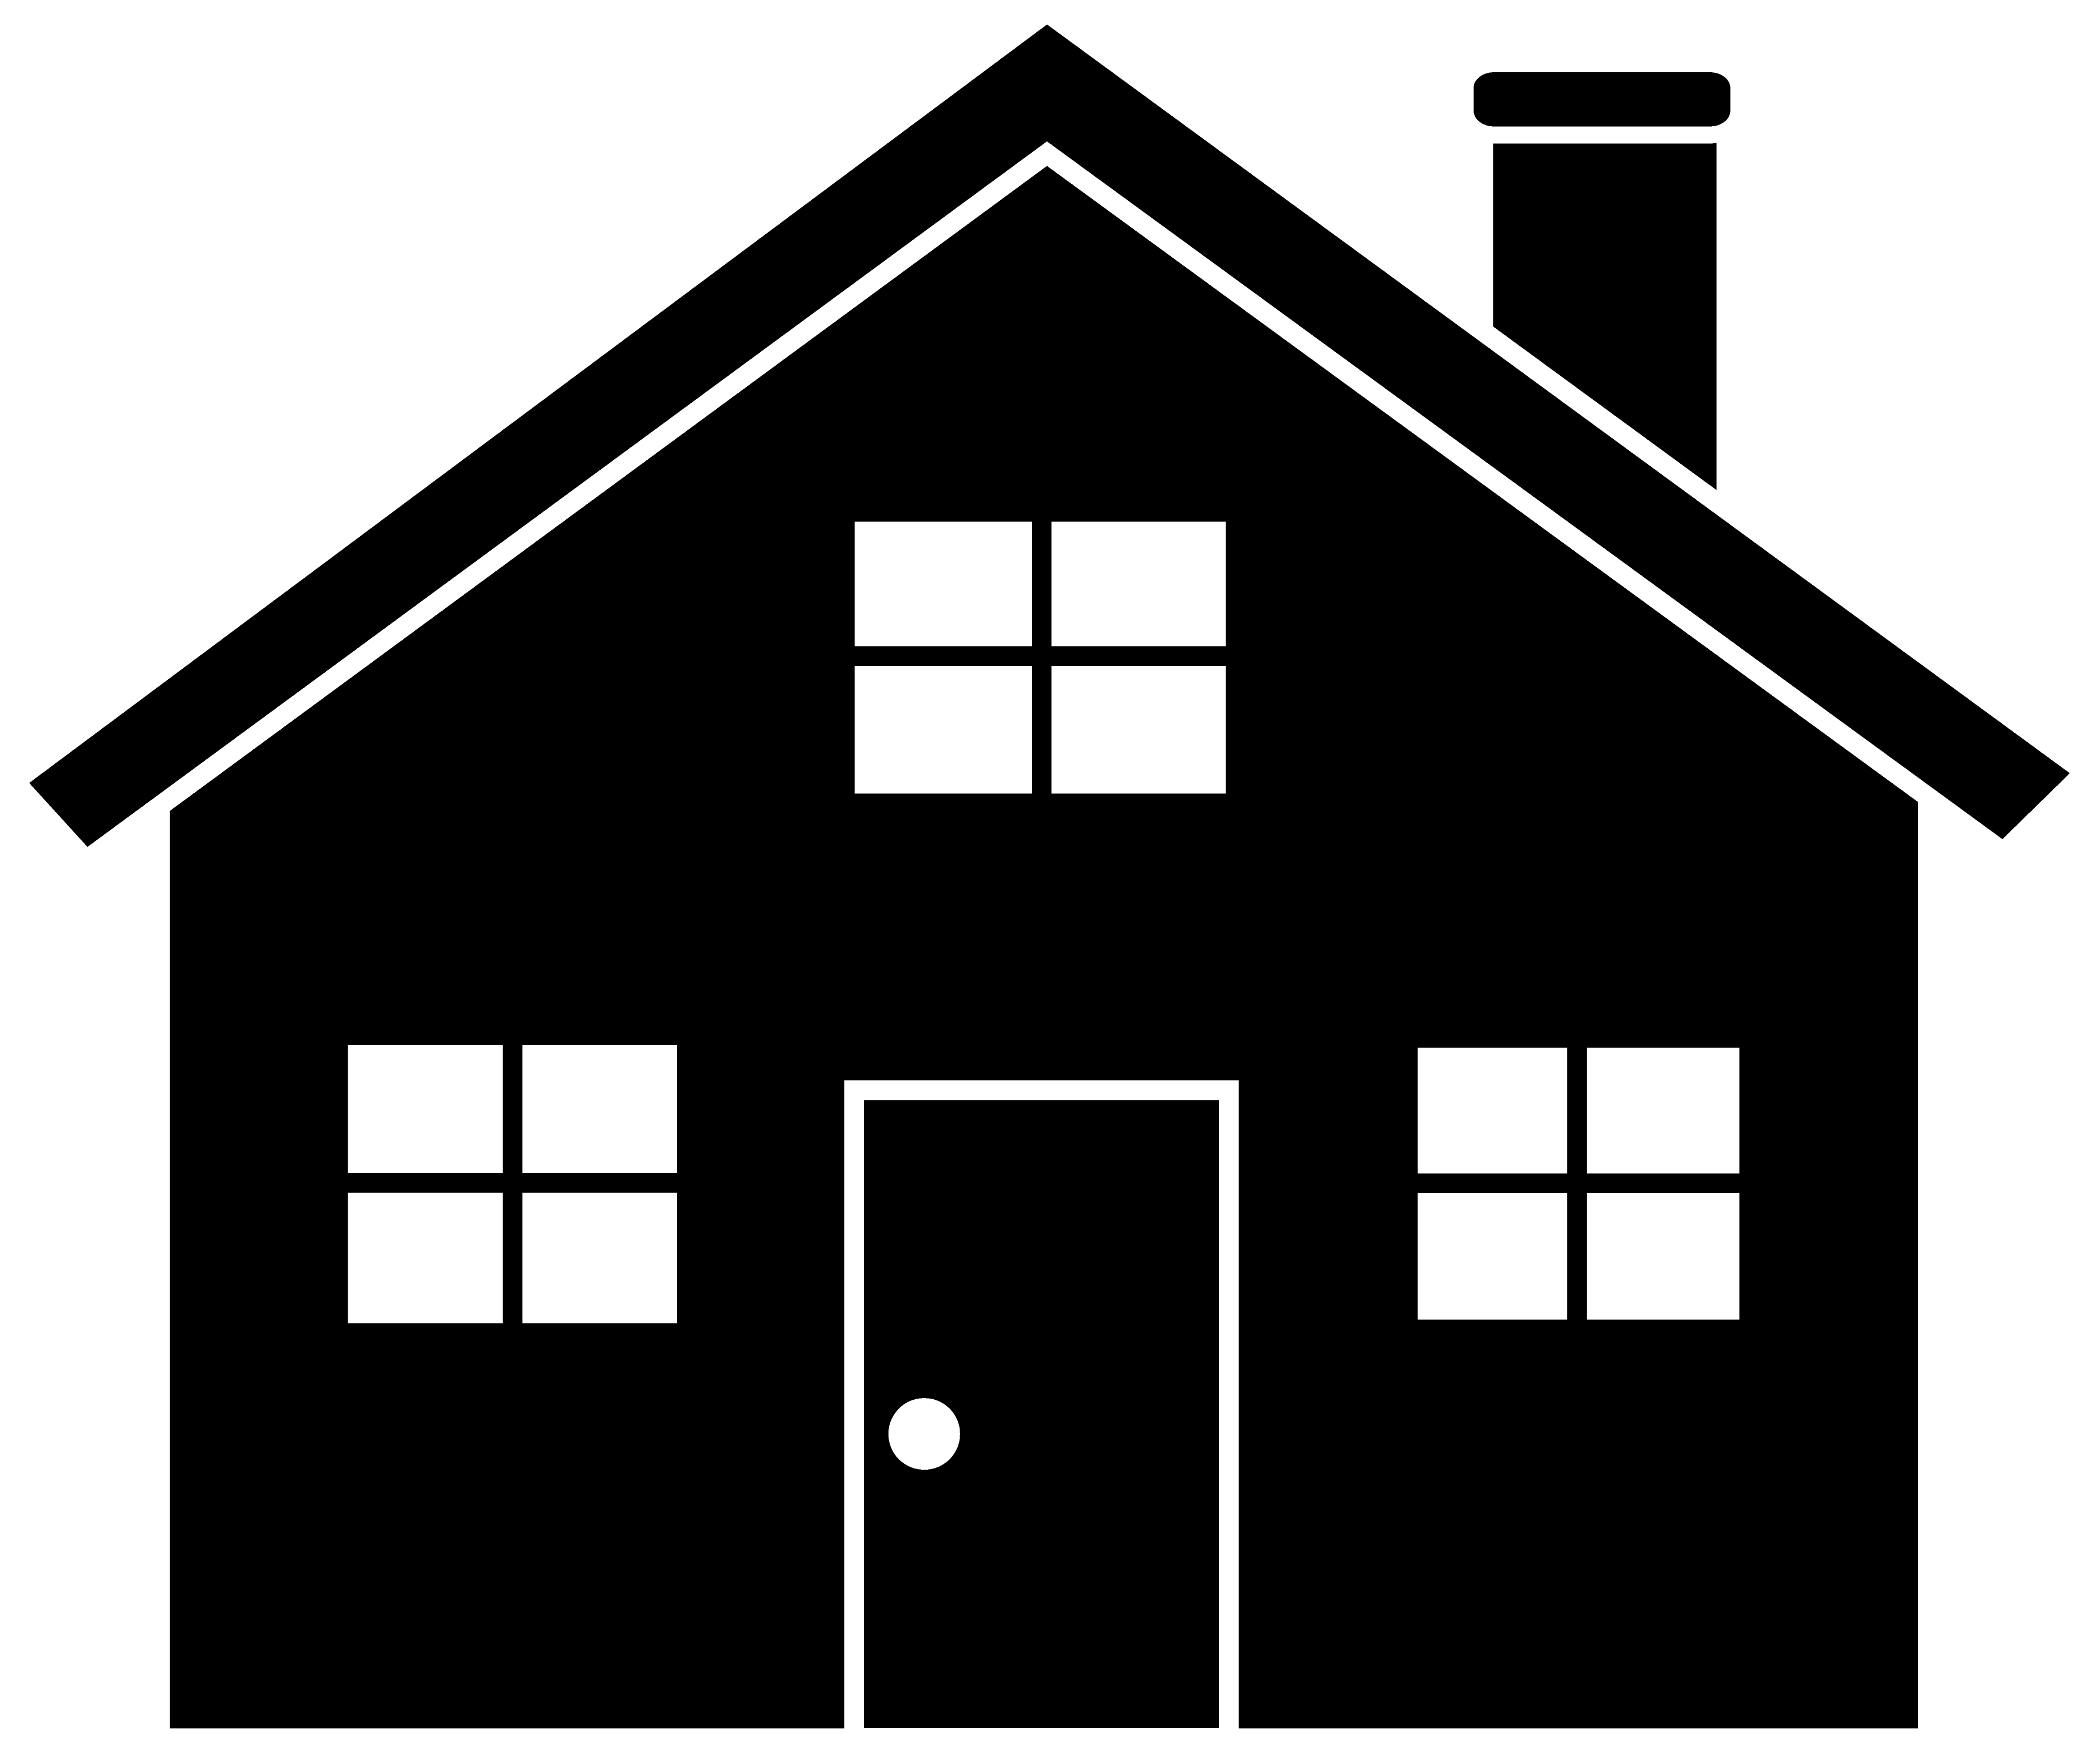 House Clipart | jokingart hdclipartall.com House Clipart clipart black and white Home Clipart